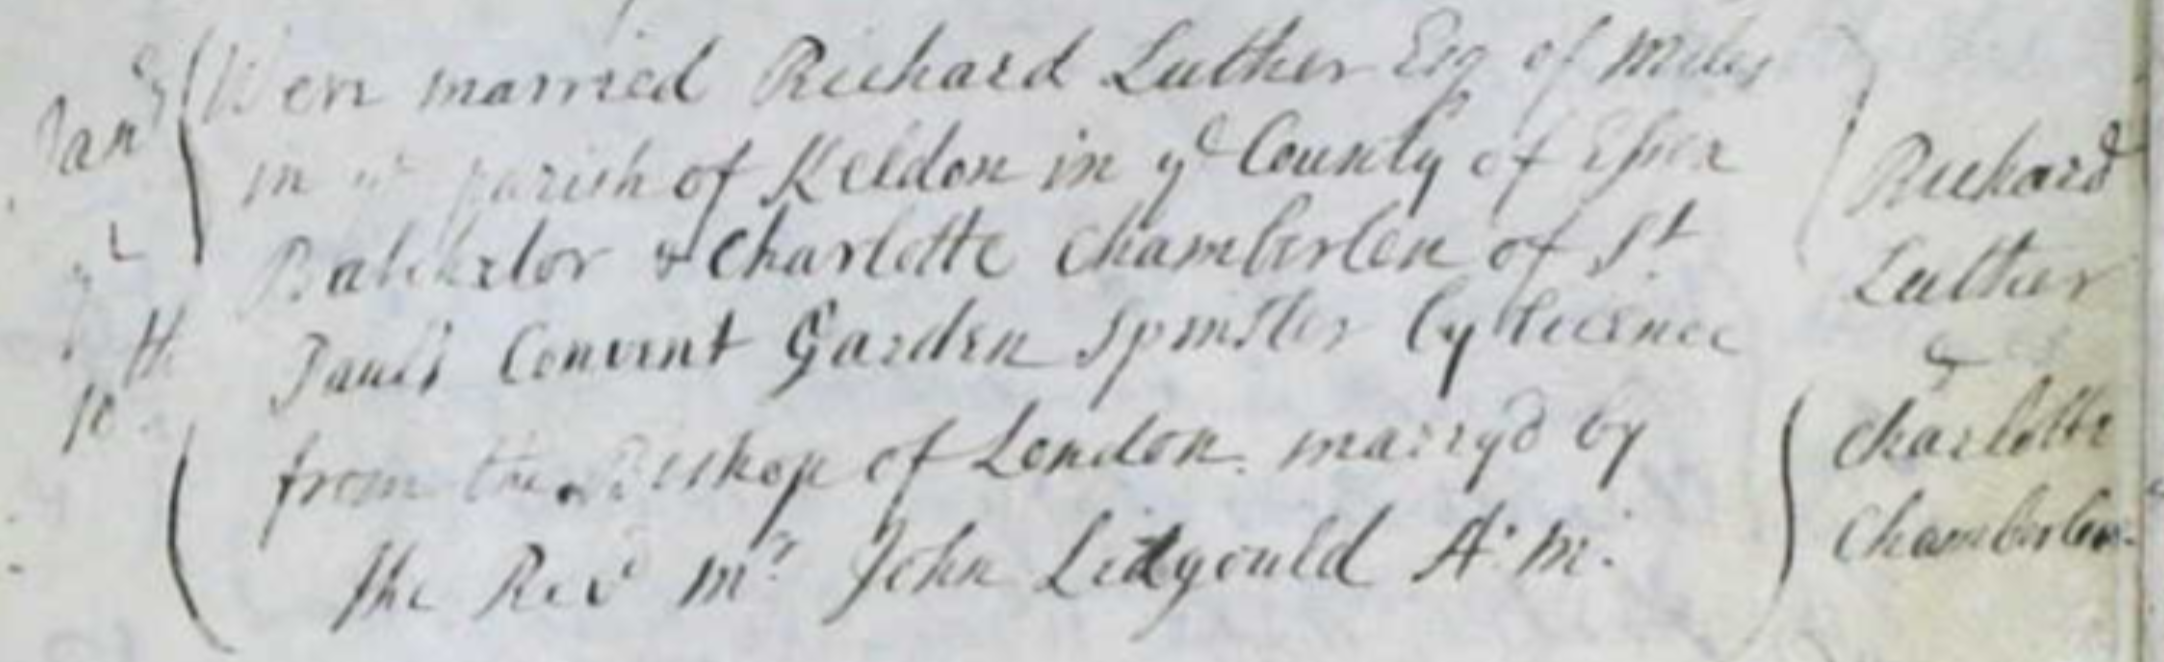 Figure 3: Marriage Register Entry for Richard Luther and Charlotte Chamberlen